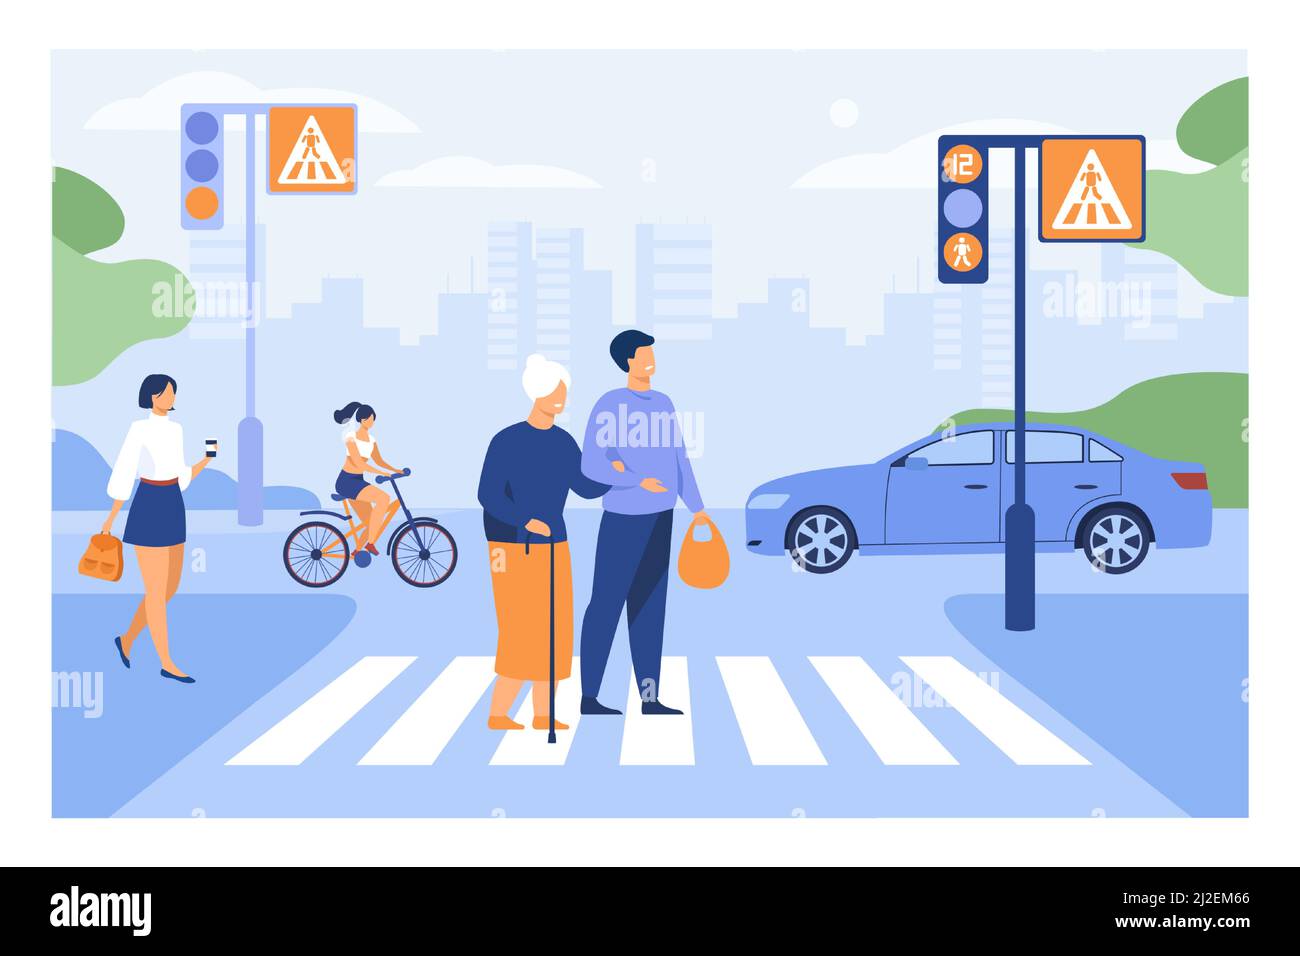 Young man helping old woman crossing road flat vector illustration. Cartoon elderly walking town crosswalk with help of guy. Urban lifestyle and citys Stock Vector